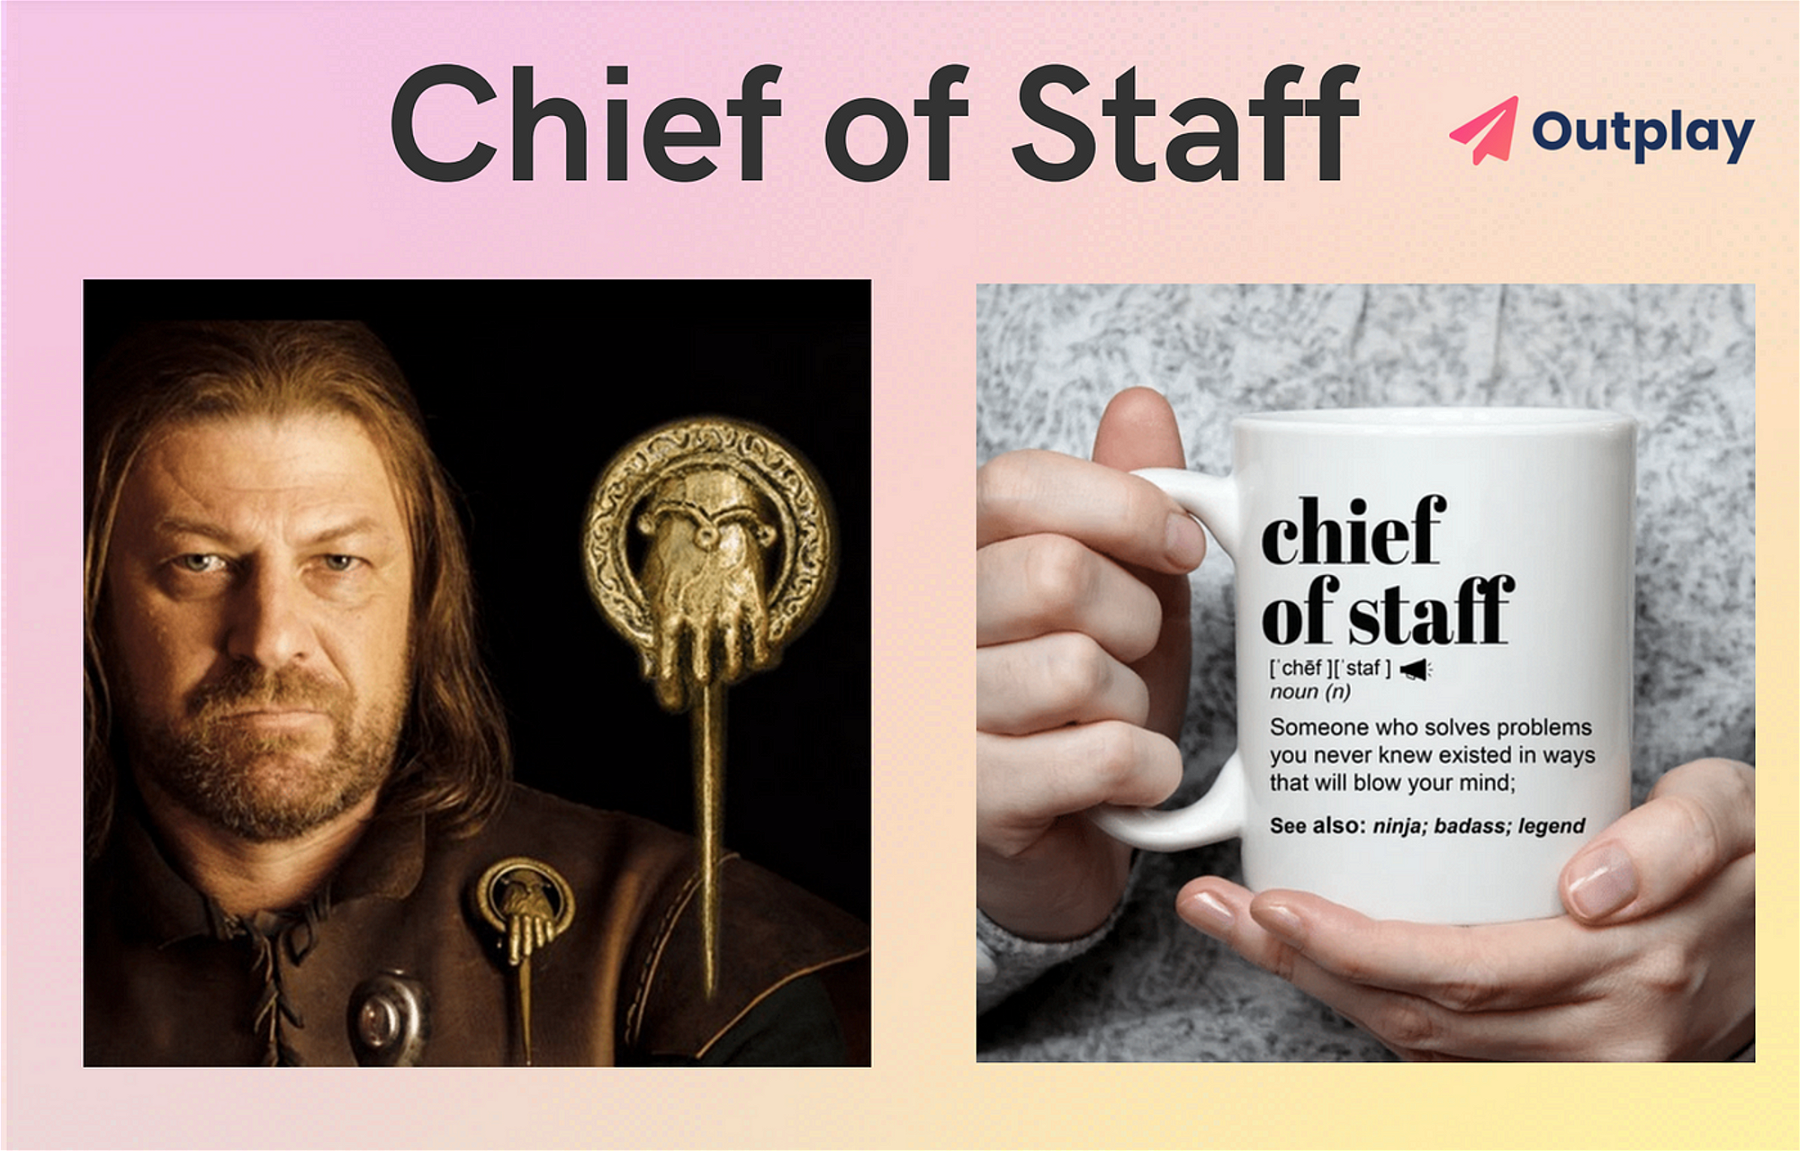 A personalised deck about why I wanted to be the Chief of Staff at Outplay eventually 😀